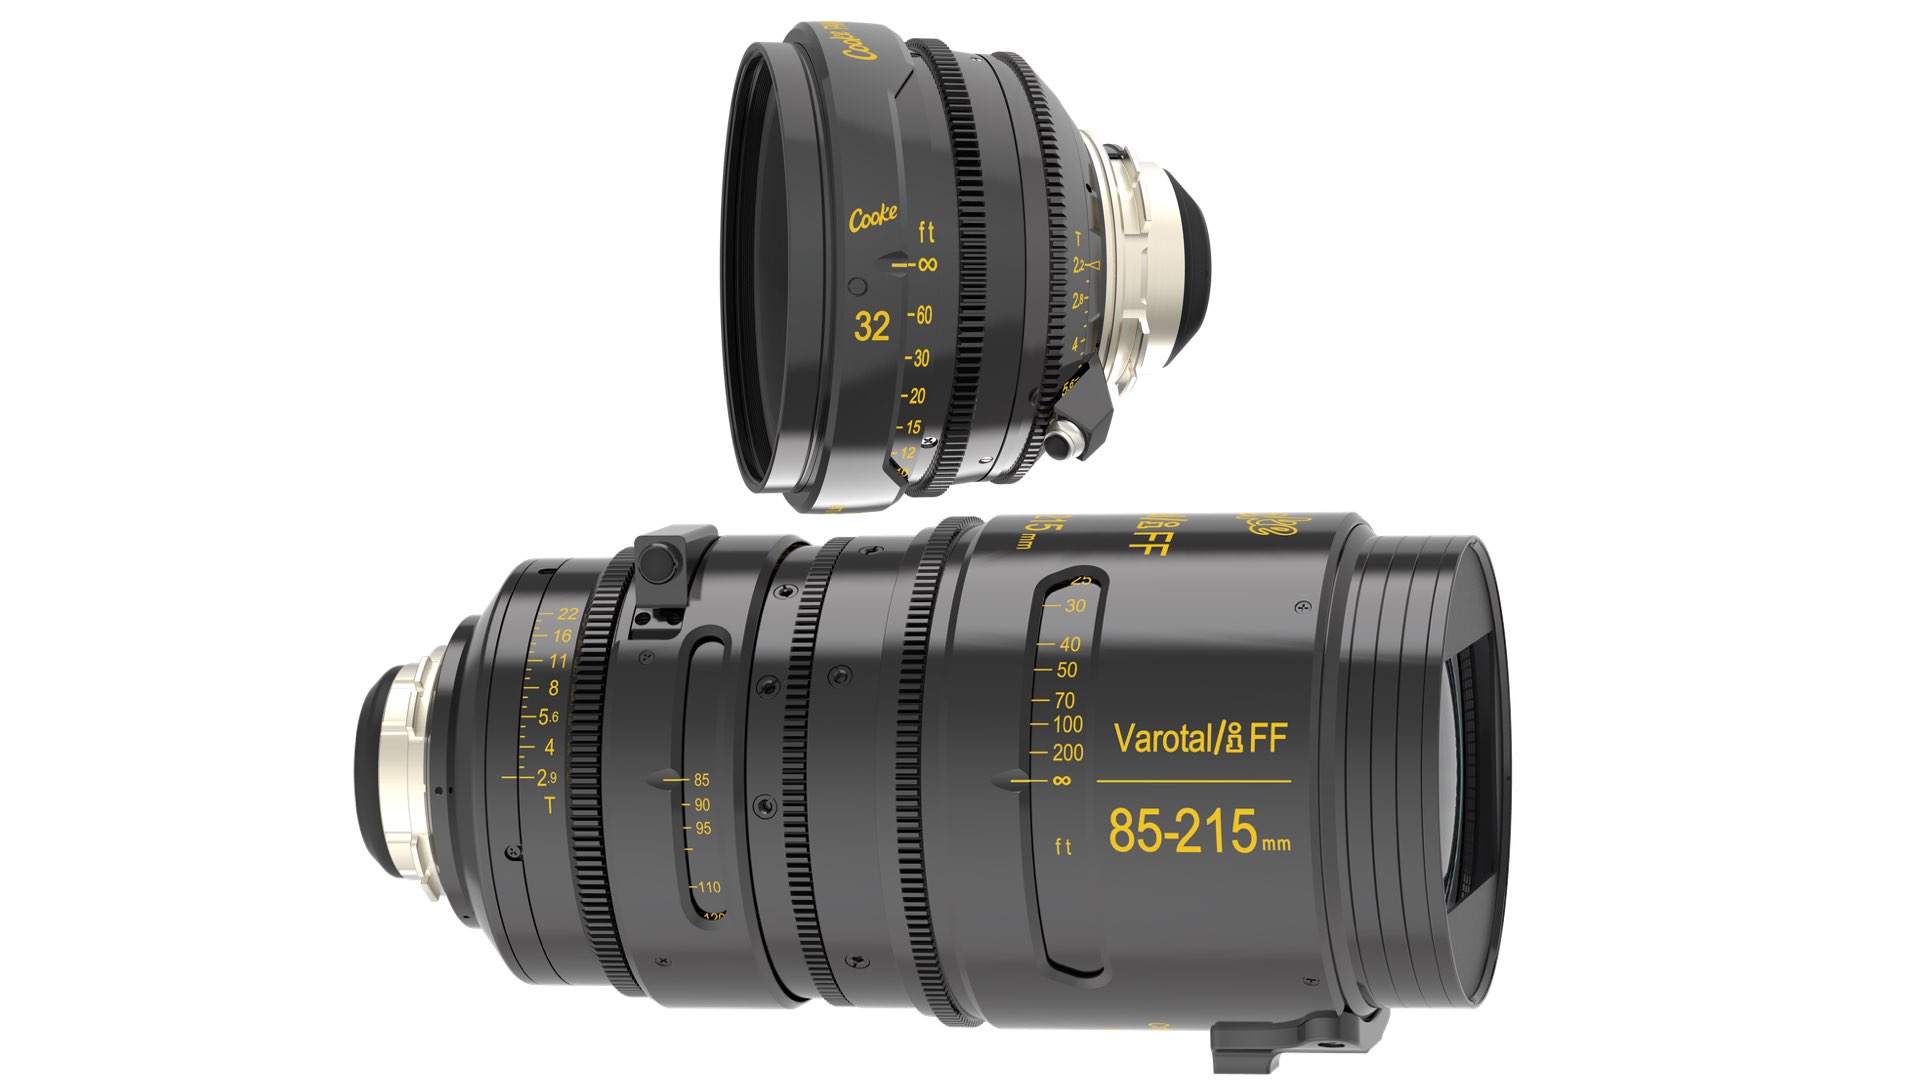 Cooke Introduces New Full-Frame Lenses: Varotal/i Zooms and Panchro/i Classics